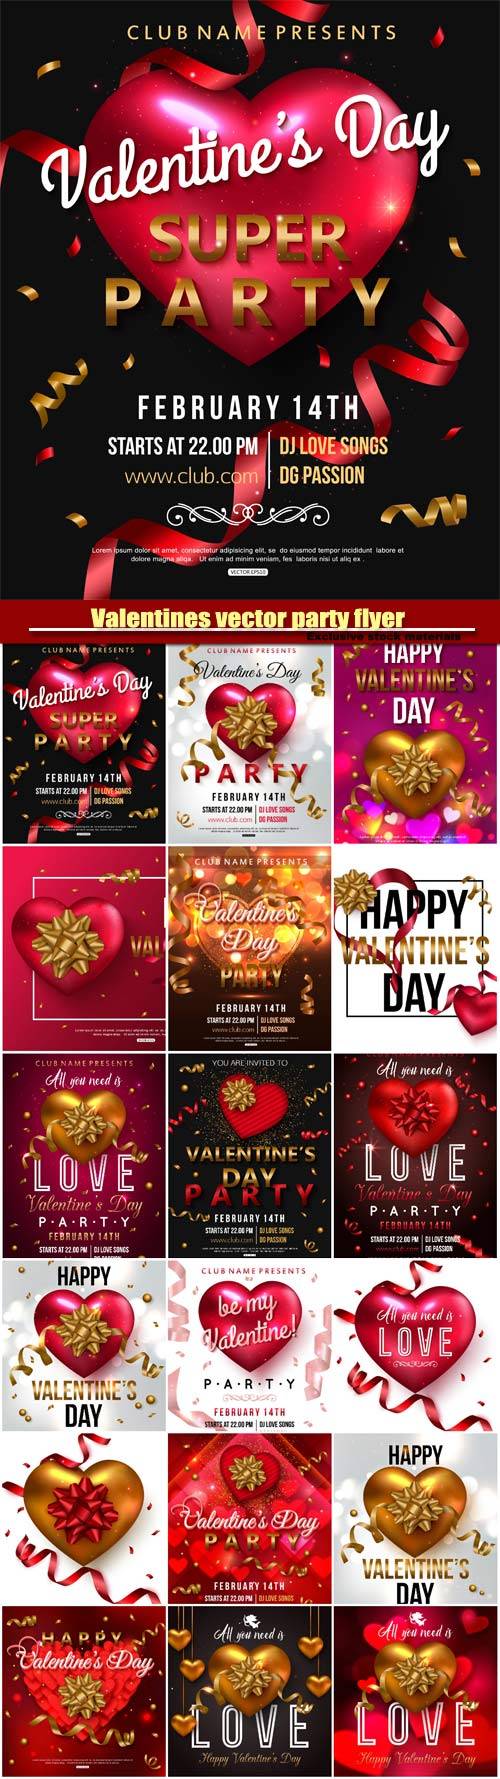 Valentines vector party flyer design with red heart bow ribbon